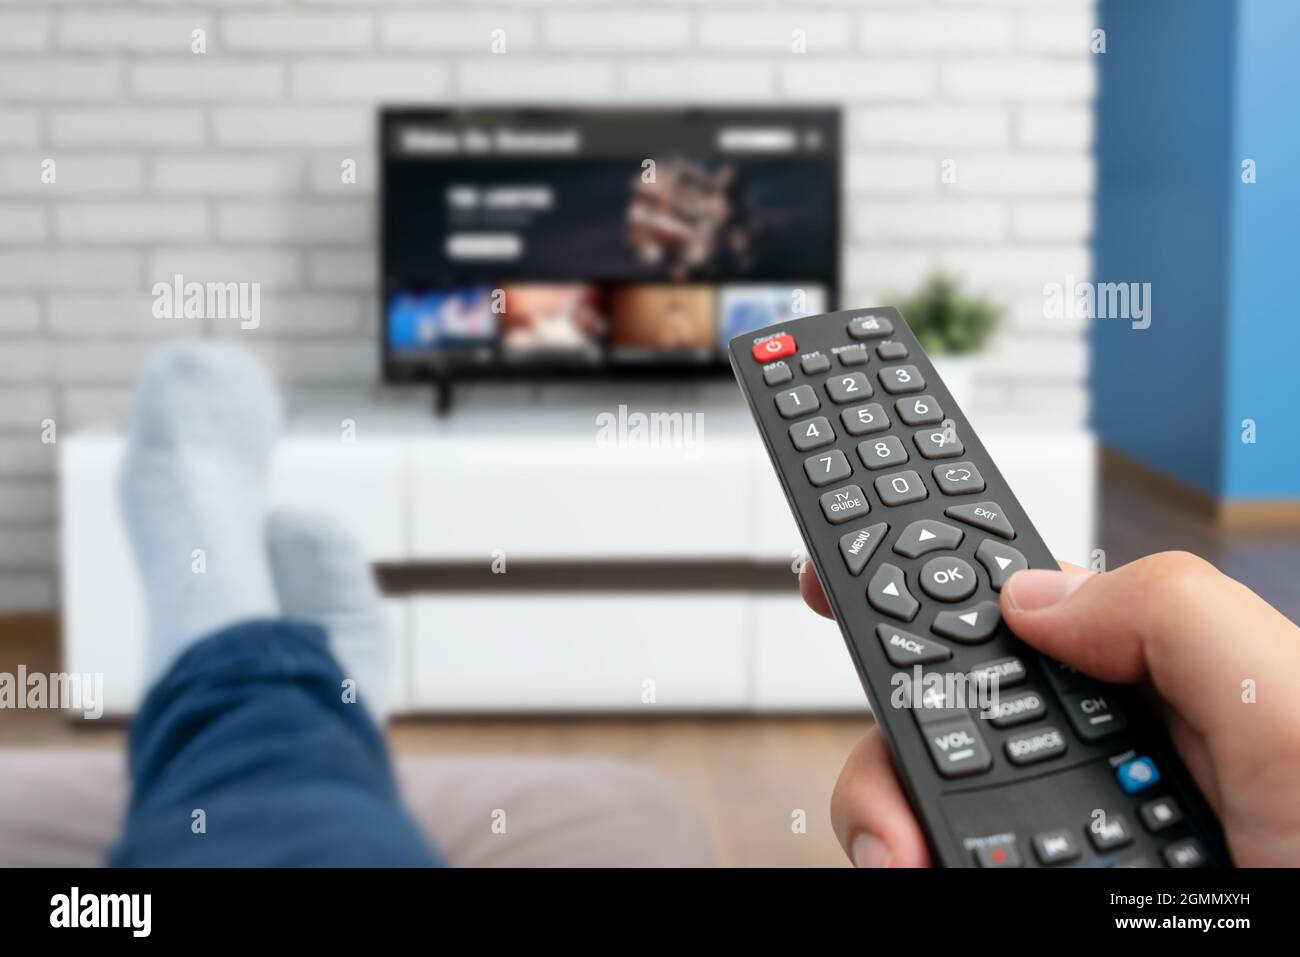 Man watching TV, lying on sofa, legs on table. Person holding remote control in living room Stock Photo